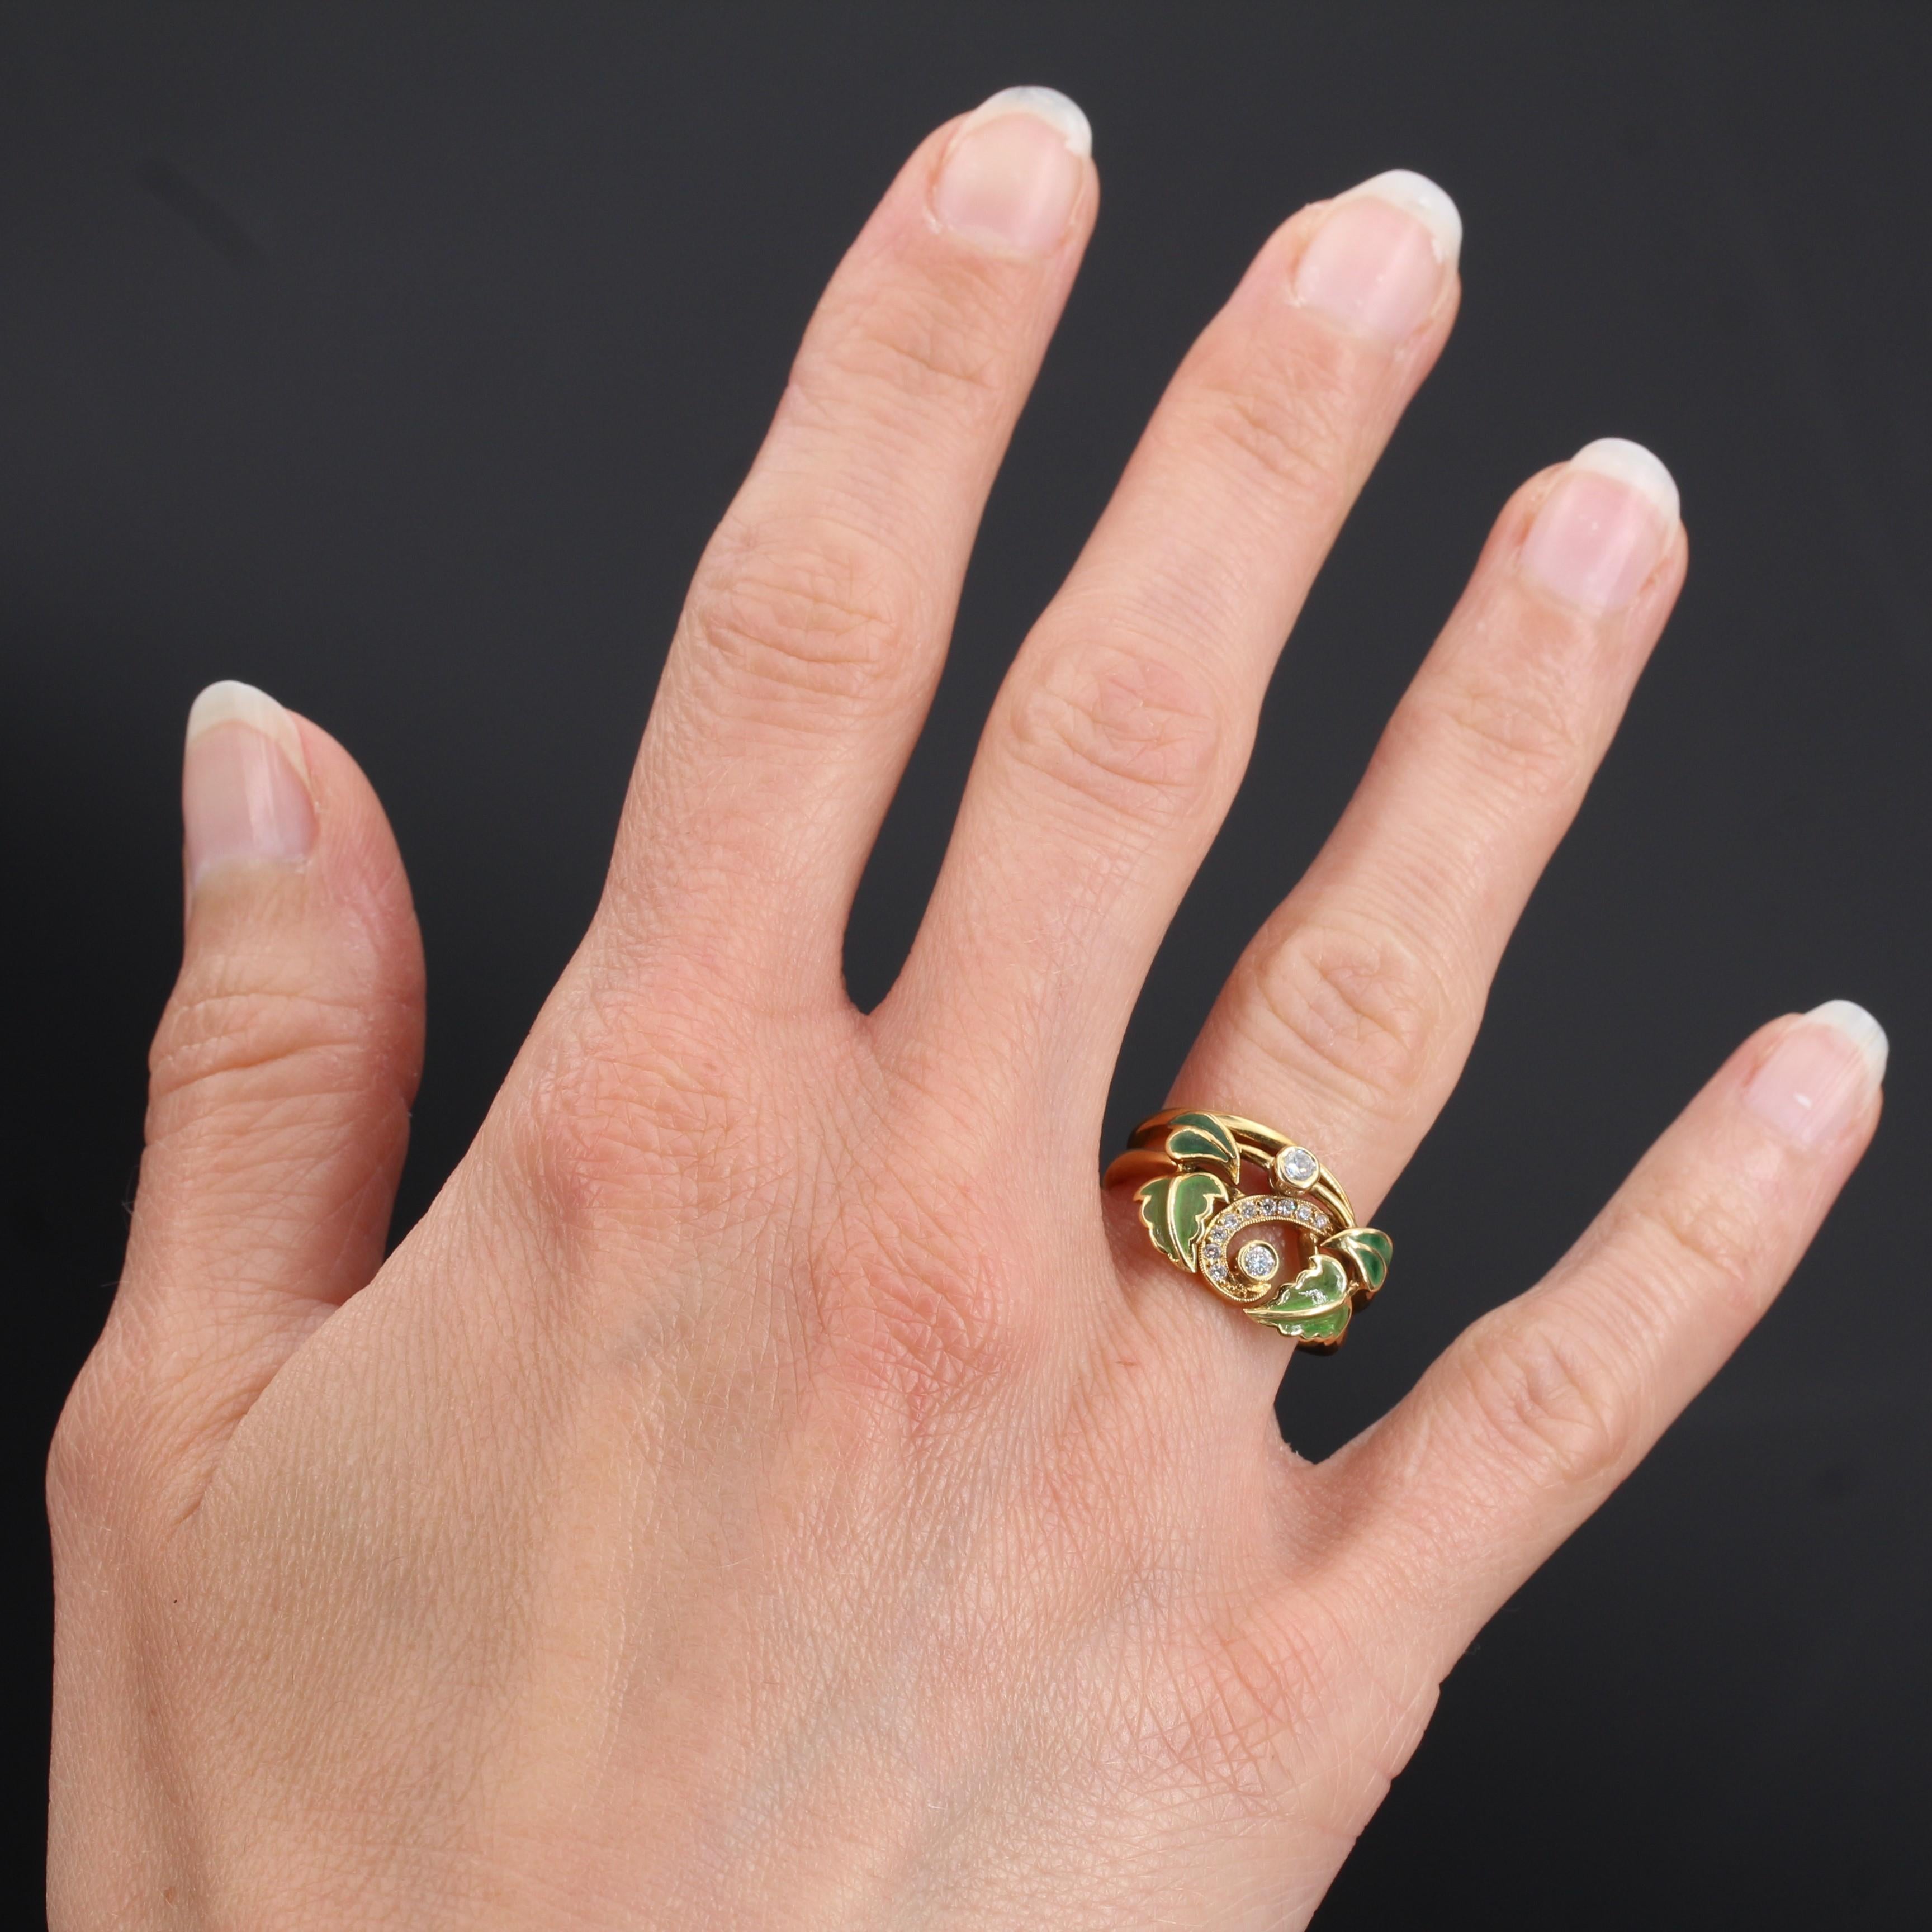 Ring in 18 carat yellow gold, eagle head hallmark. 

This ring is composed of 2 golden bands that are set at the front with 2 bezel set brilliant cut diamonds in an openwork bed set with 9 other smaller diamonds in a curl. On each side are enamelled